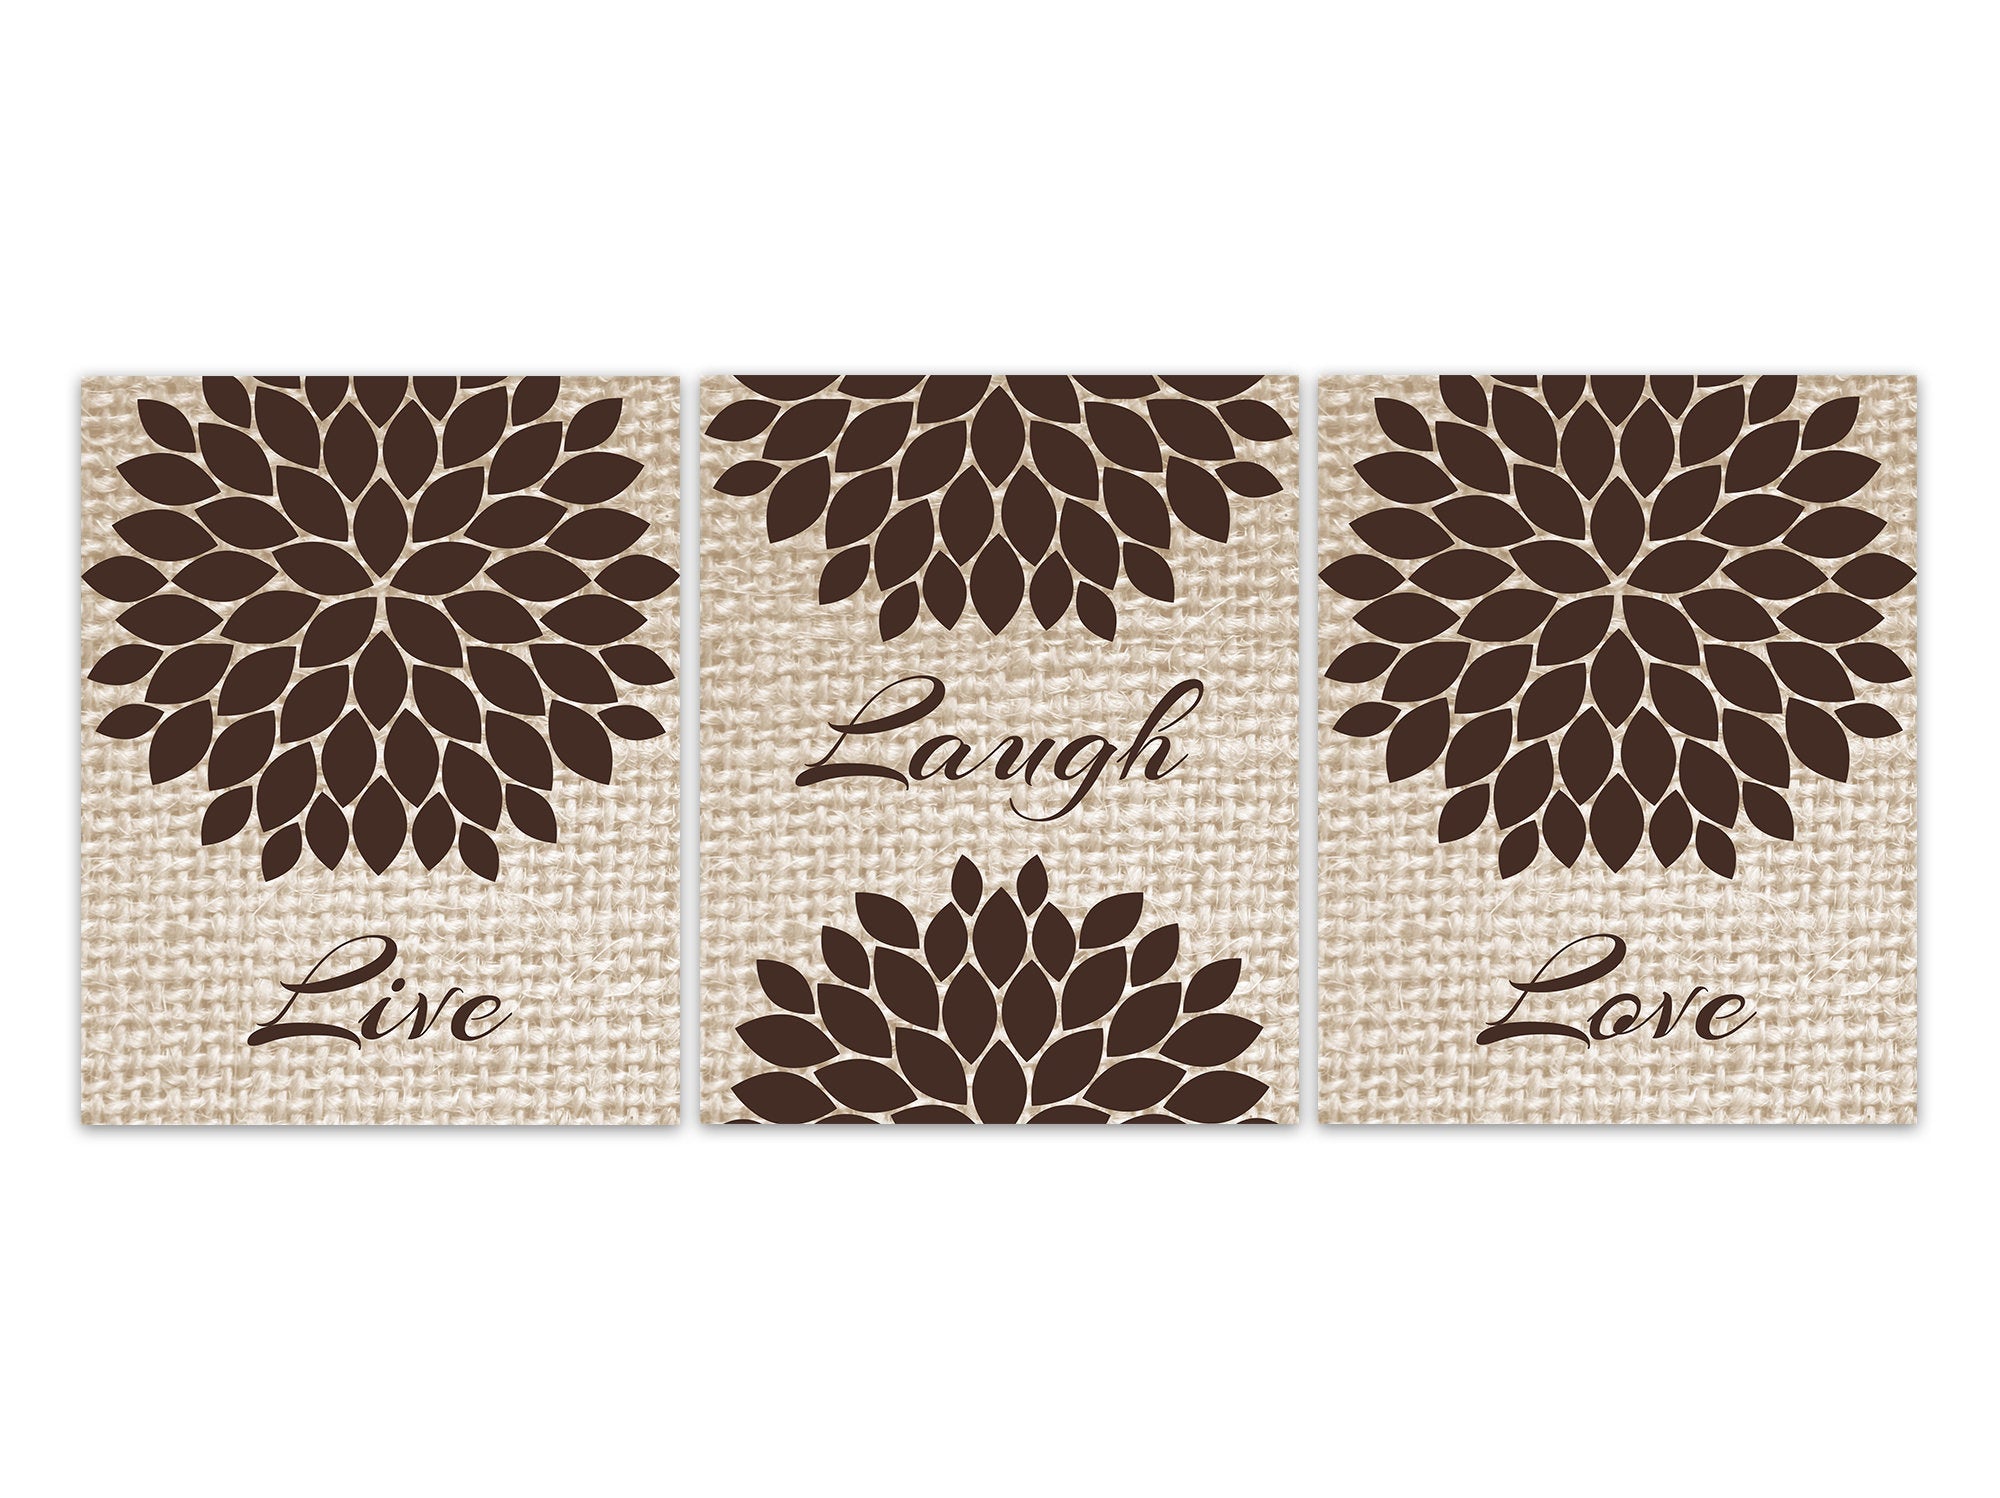 Live Laugh Love Home Decor Wall Art, Brown Bedroom Vintage Decor Wall Art, Brown Burlap Effect Family Quote Canvas or Prints - HOME619